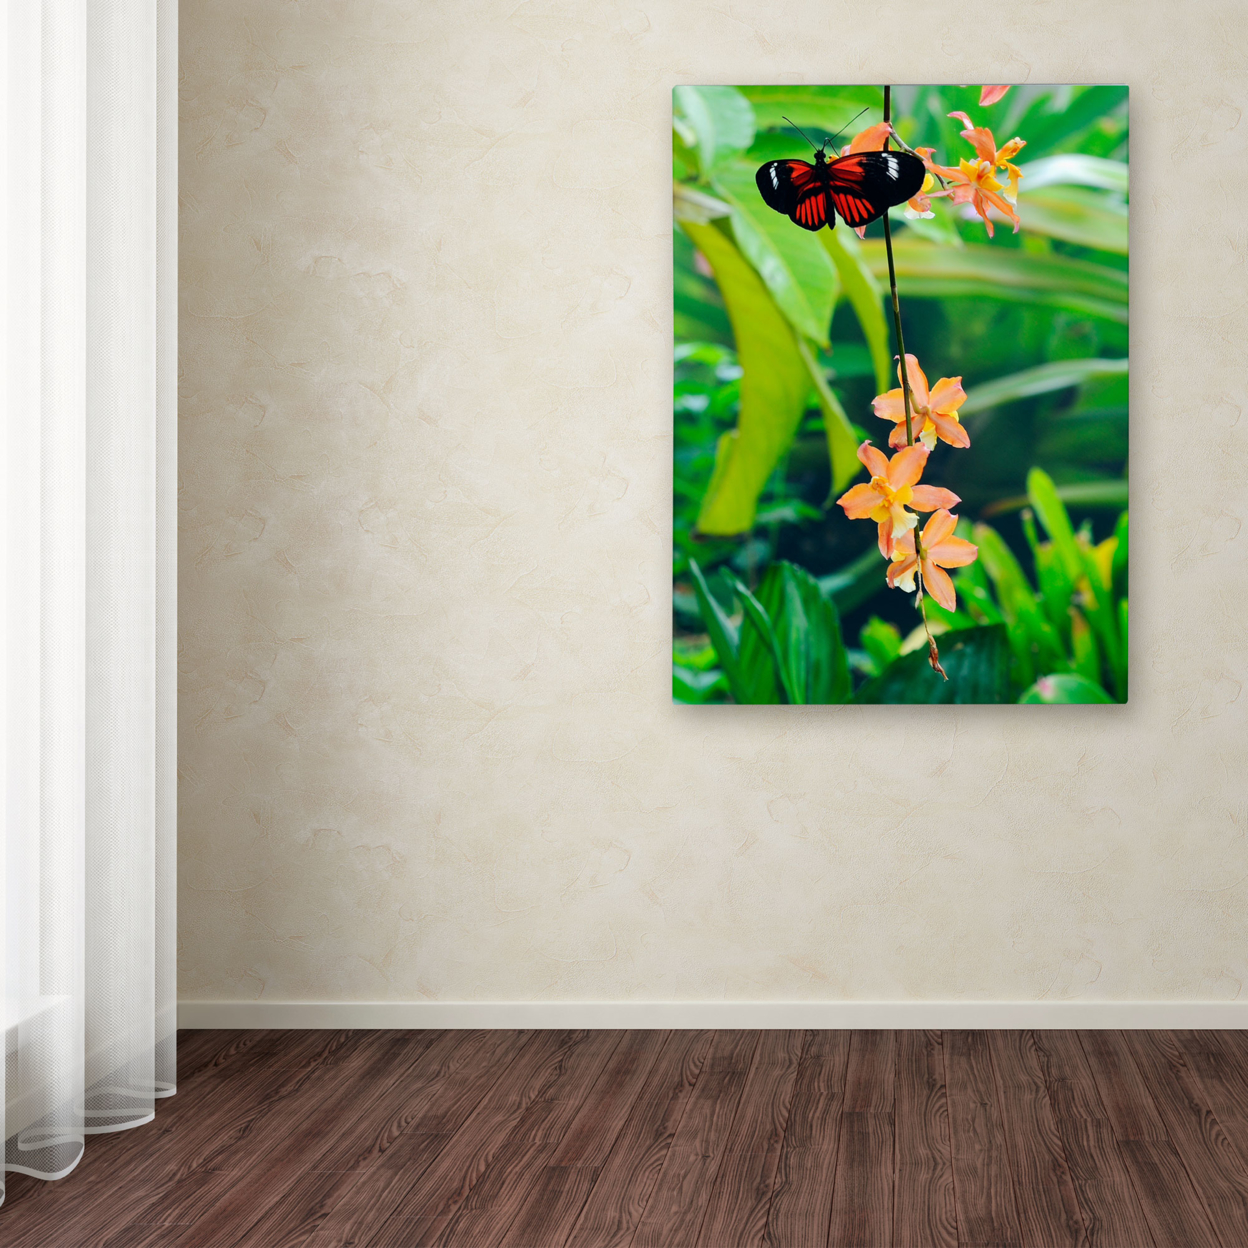 Kurt Shaffer 'Hecale Longwing On Orchid' Canvas Wall Art 35 X 47 Inches